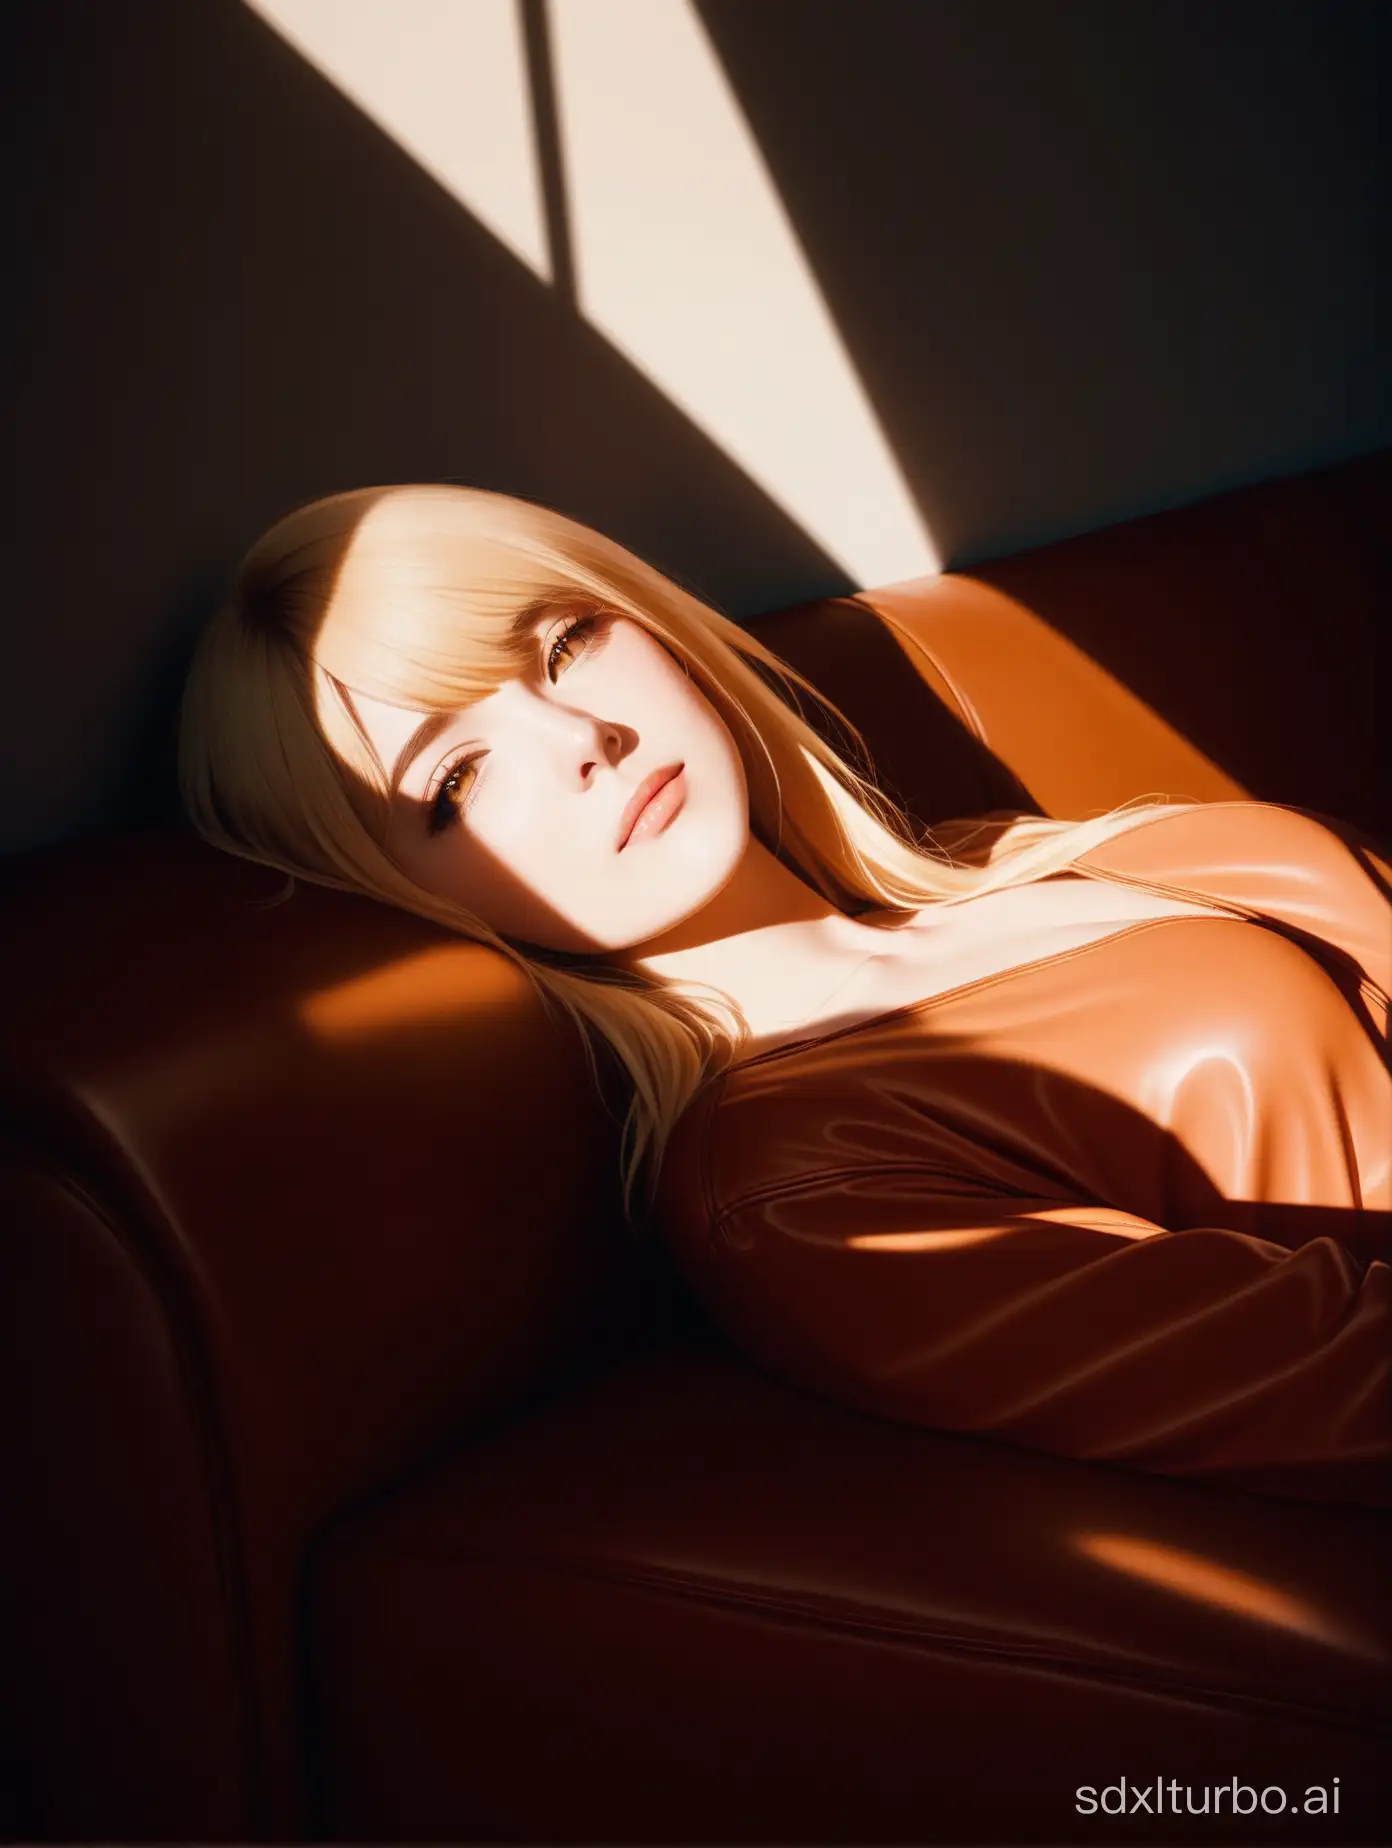 A woman with beautiful blond hair lying on a leather sofa in the interior of a dark room, light from the window from the side, shadows, golden hour, kodak aerochrome